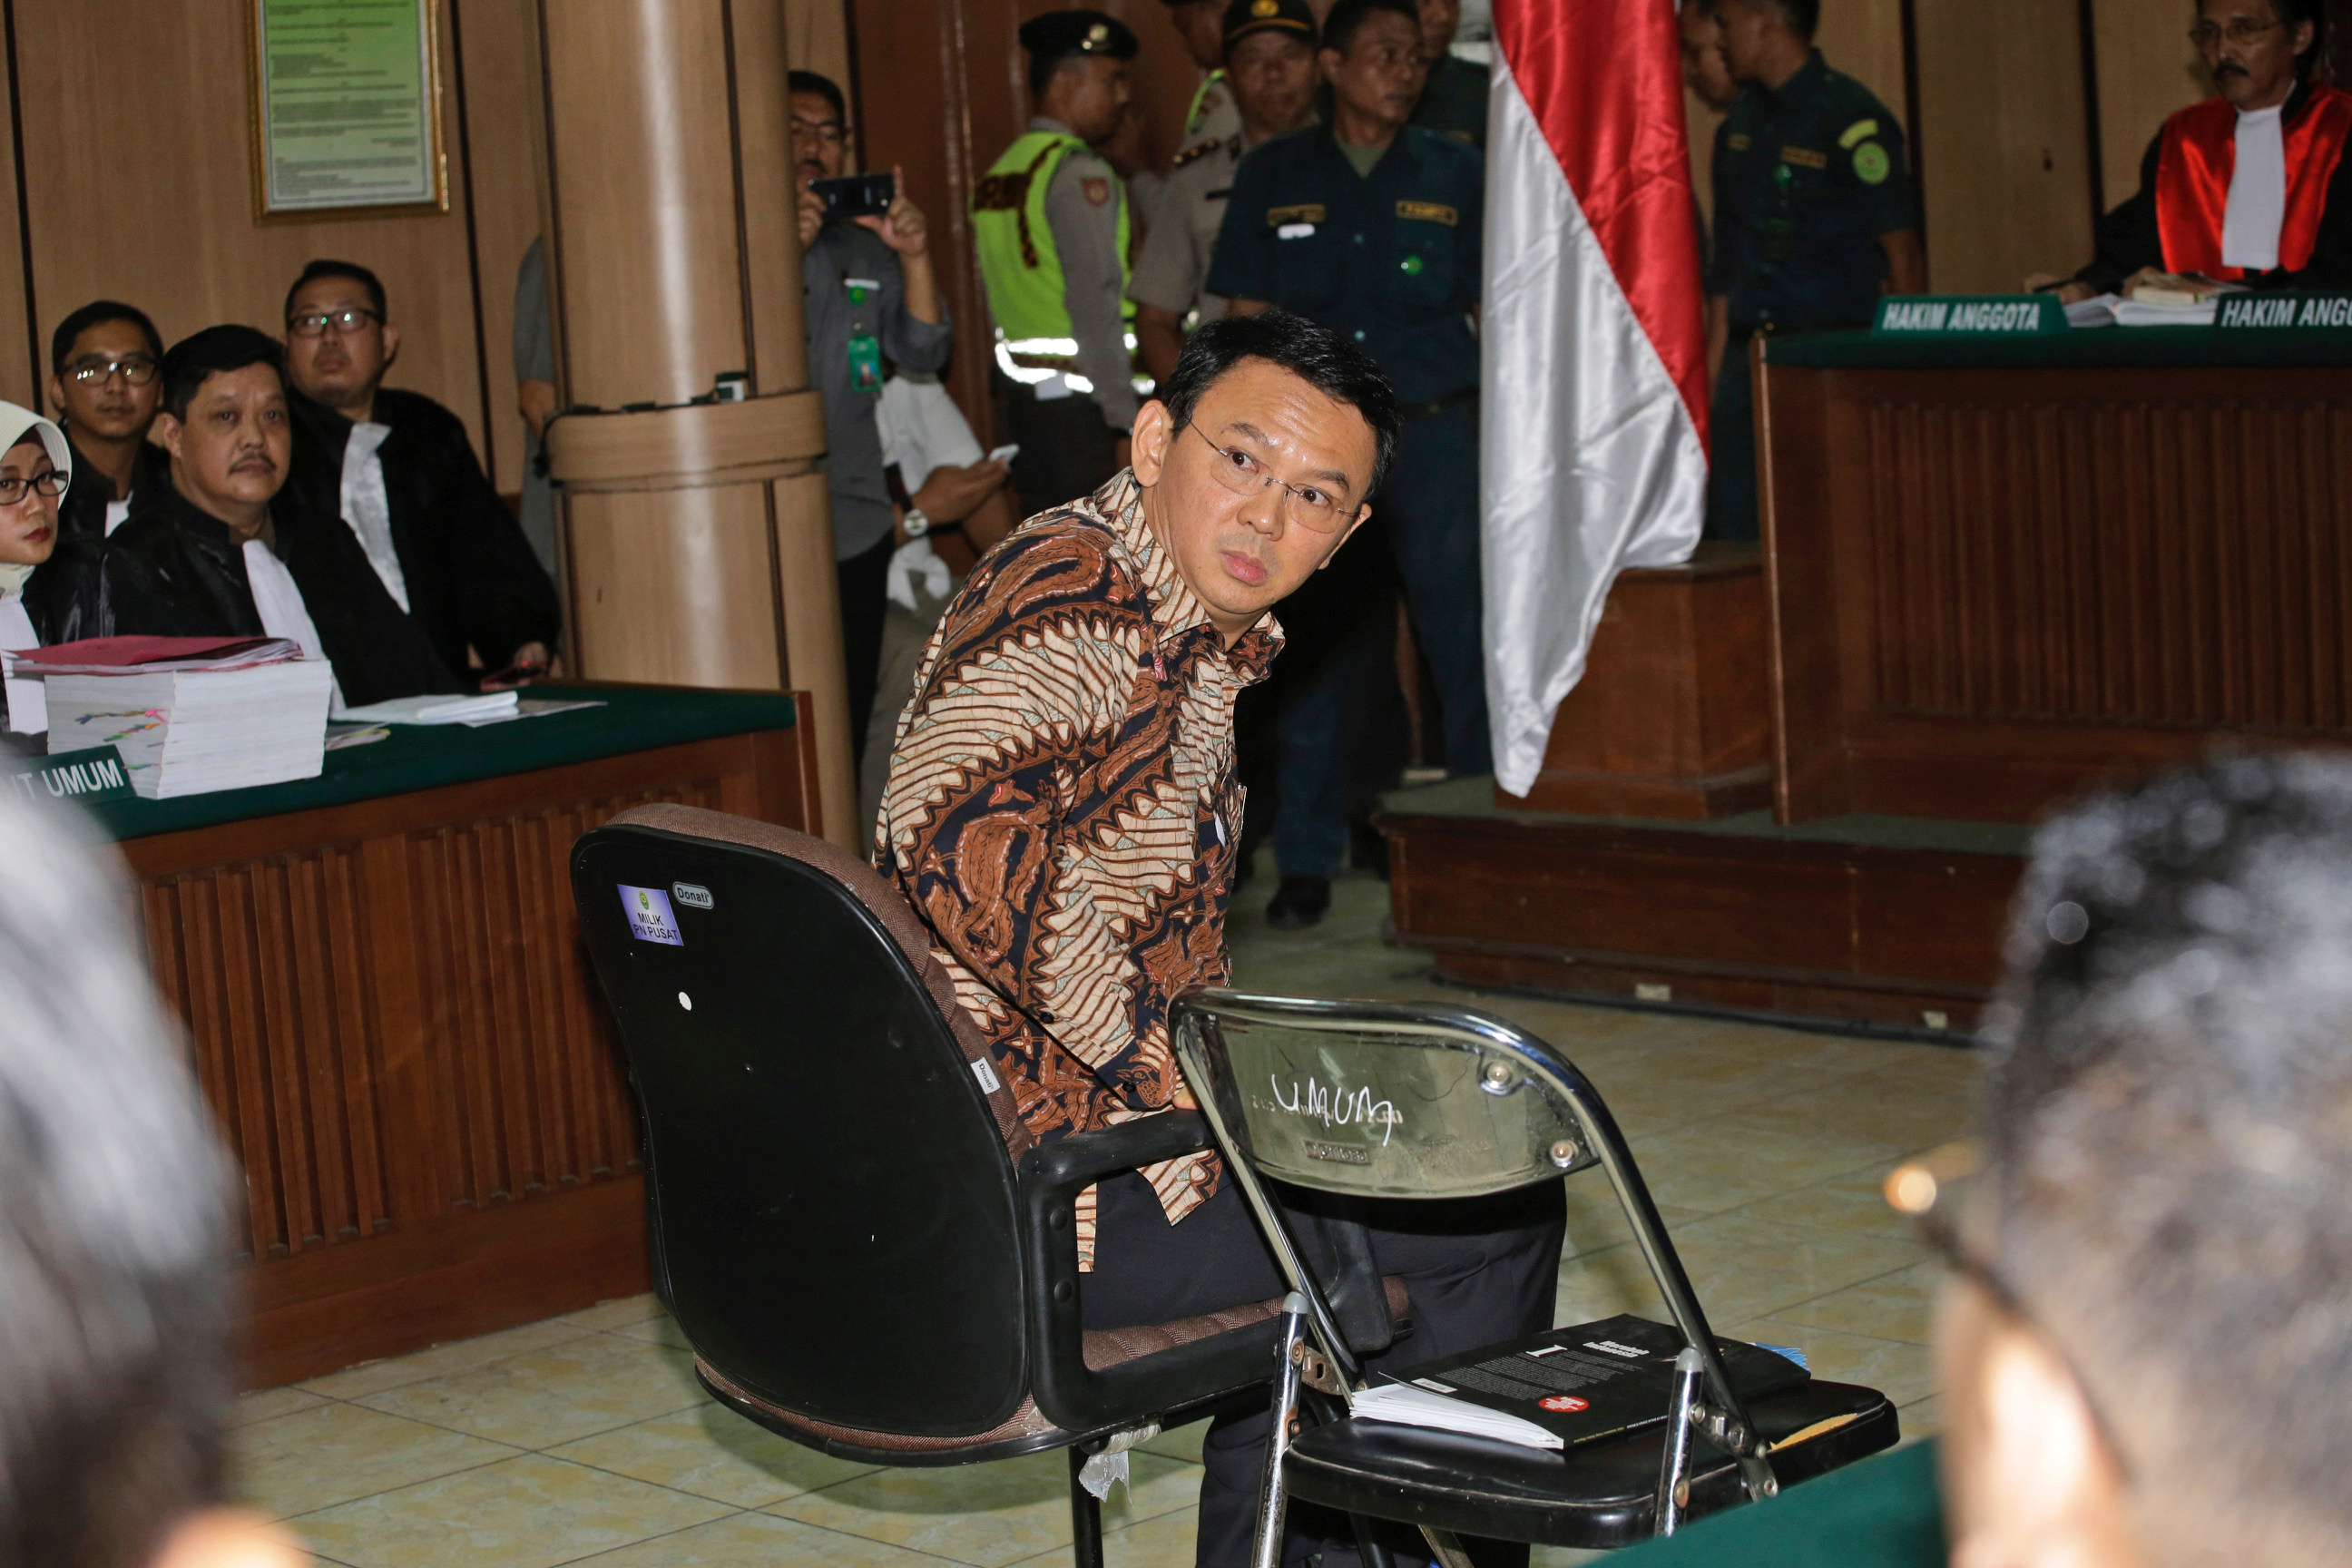 Jakarta Governor Basuki Tjahaja Purnama, popularly known as "Ahok", sits on the defendant's chair at the start of his trial hearing at North Jakarta District Court in Jakarta